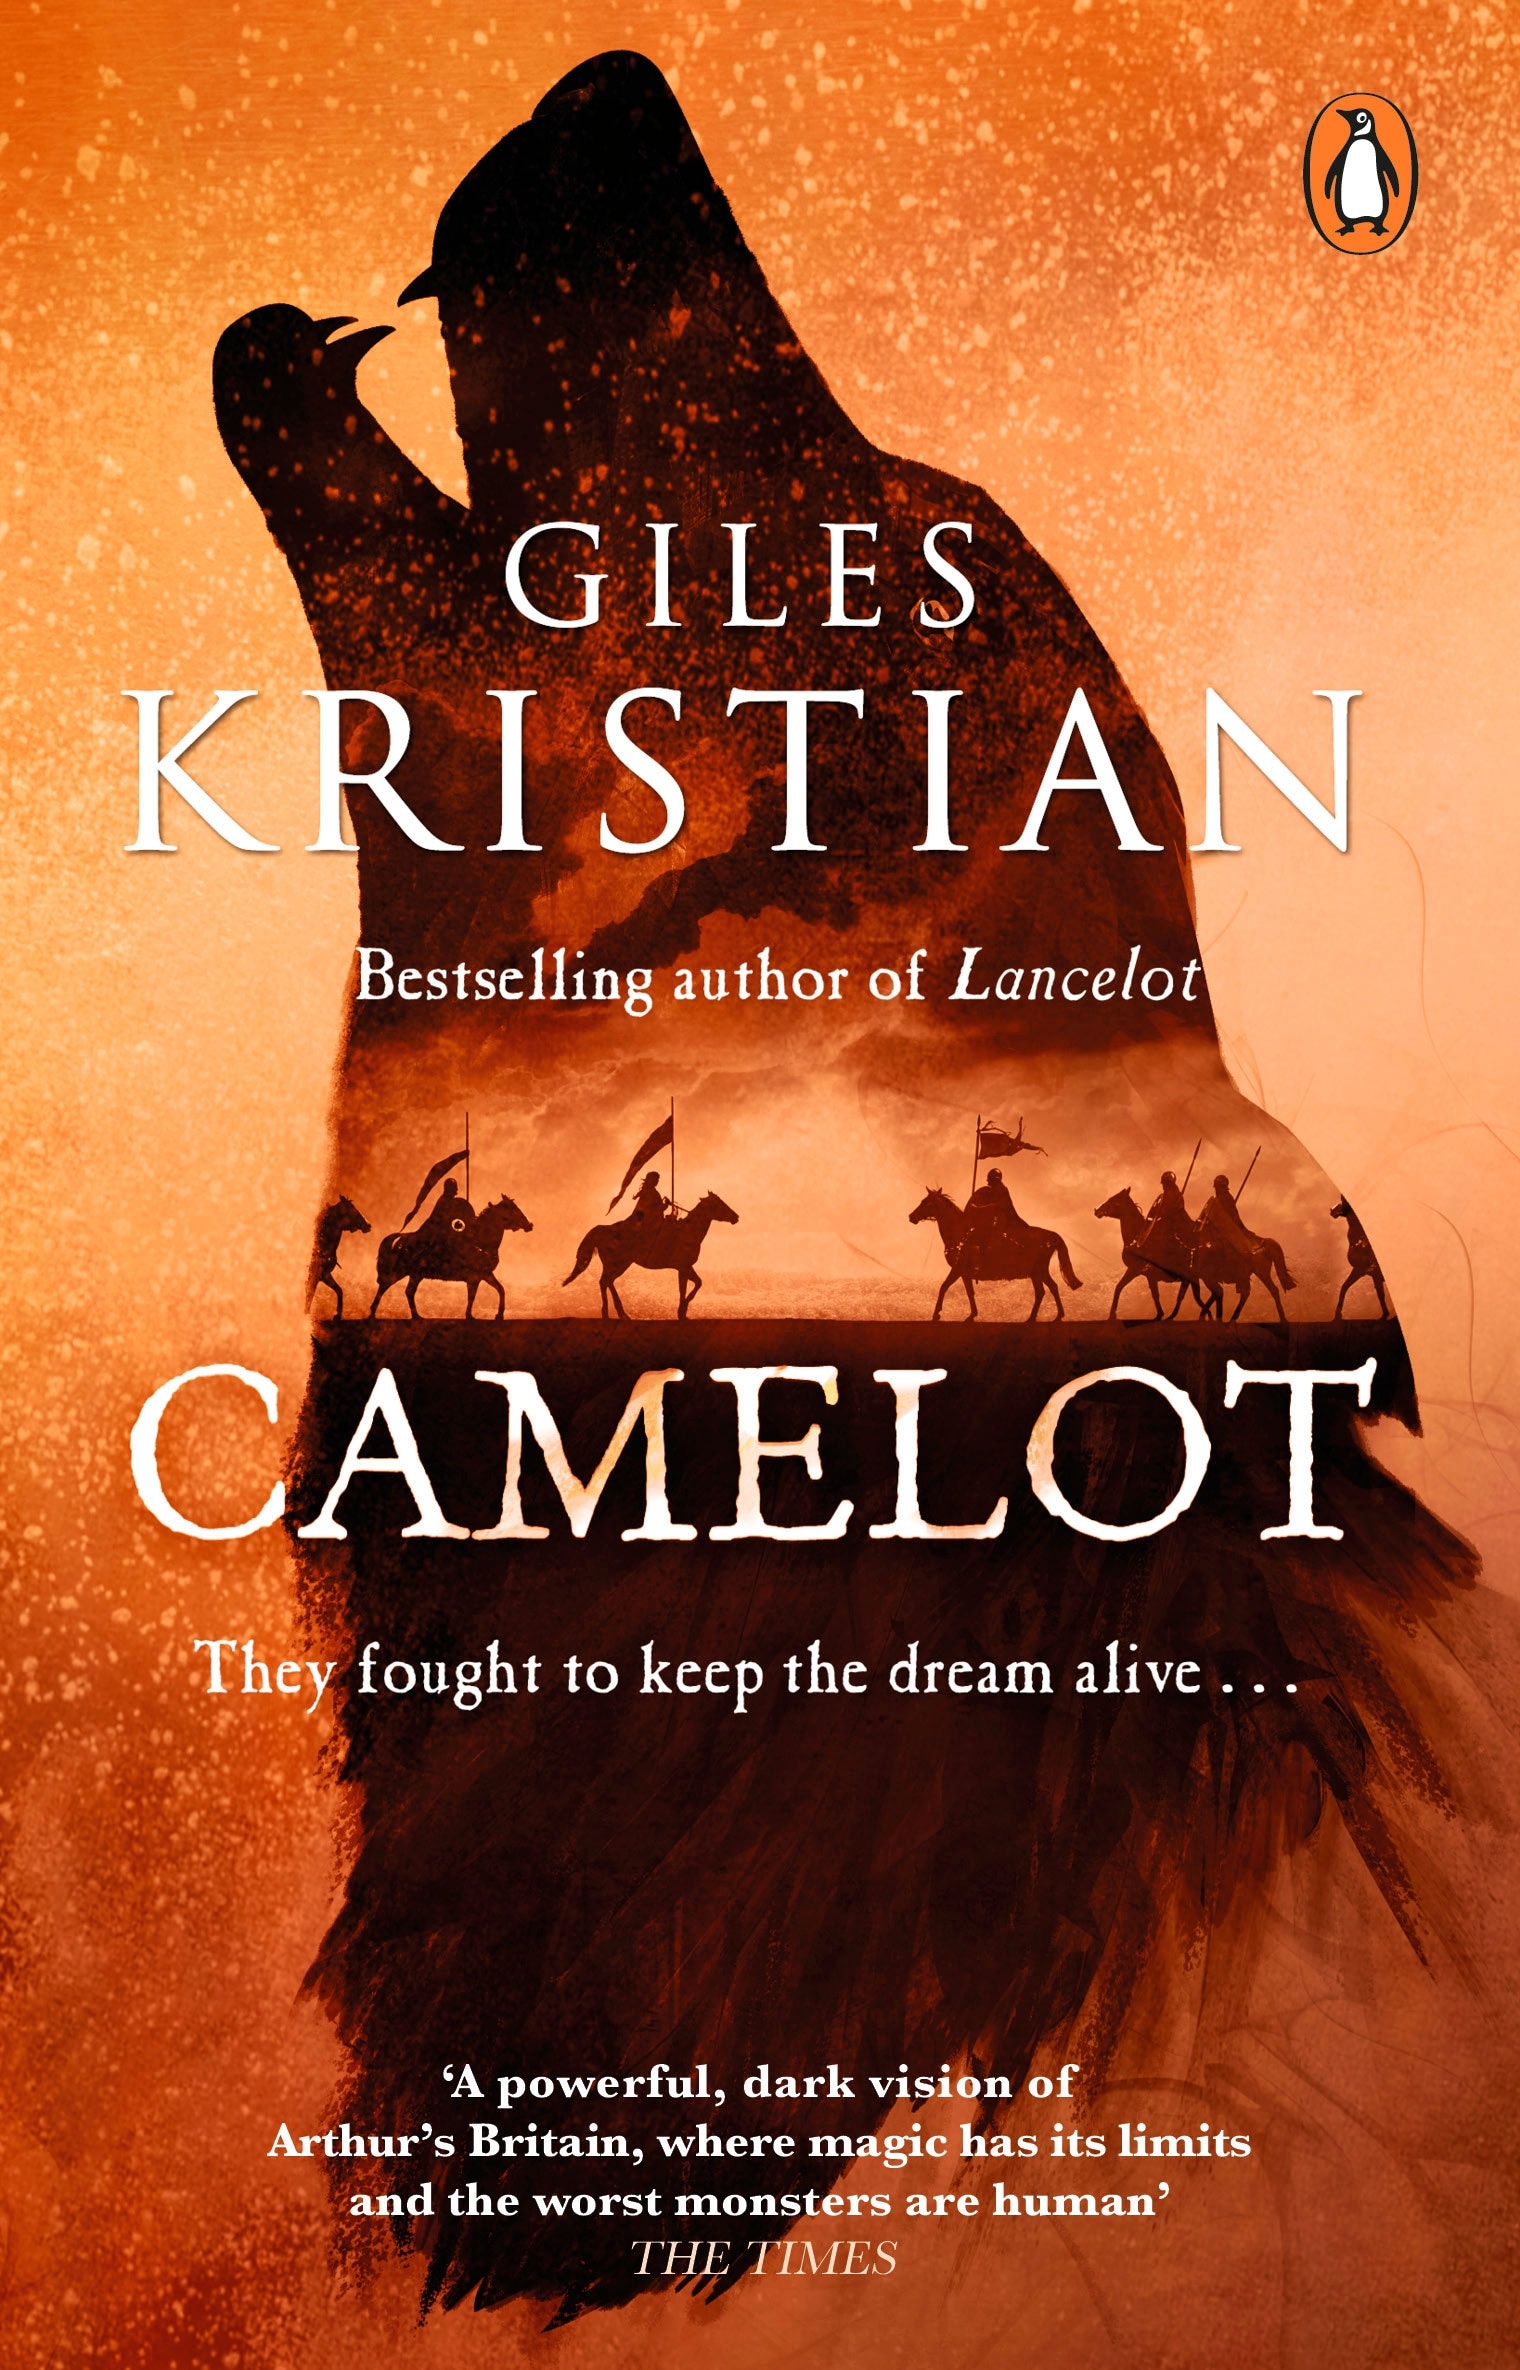 Book “Camelot” by Giles Kristian — June 24, 2021